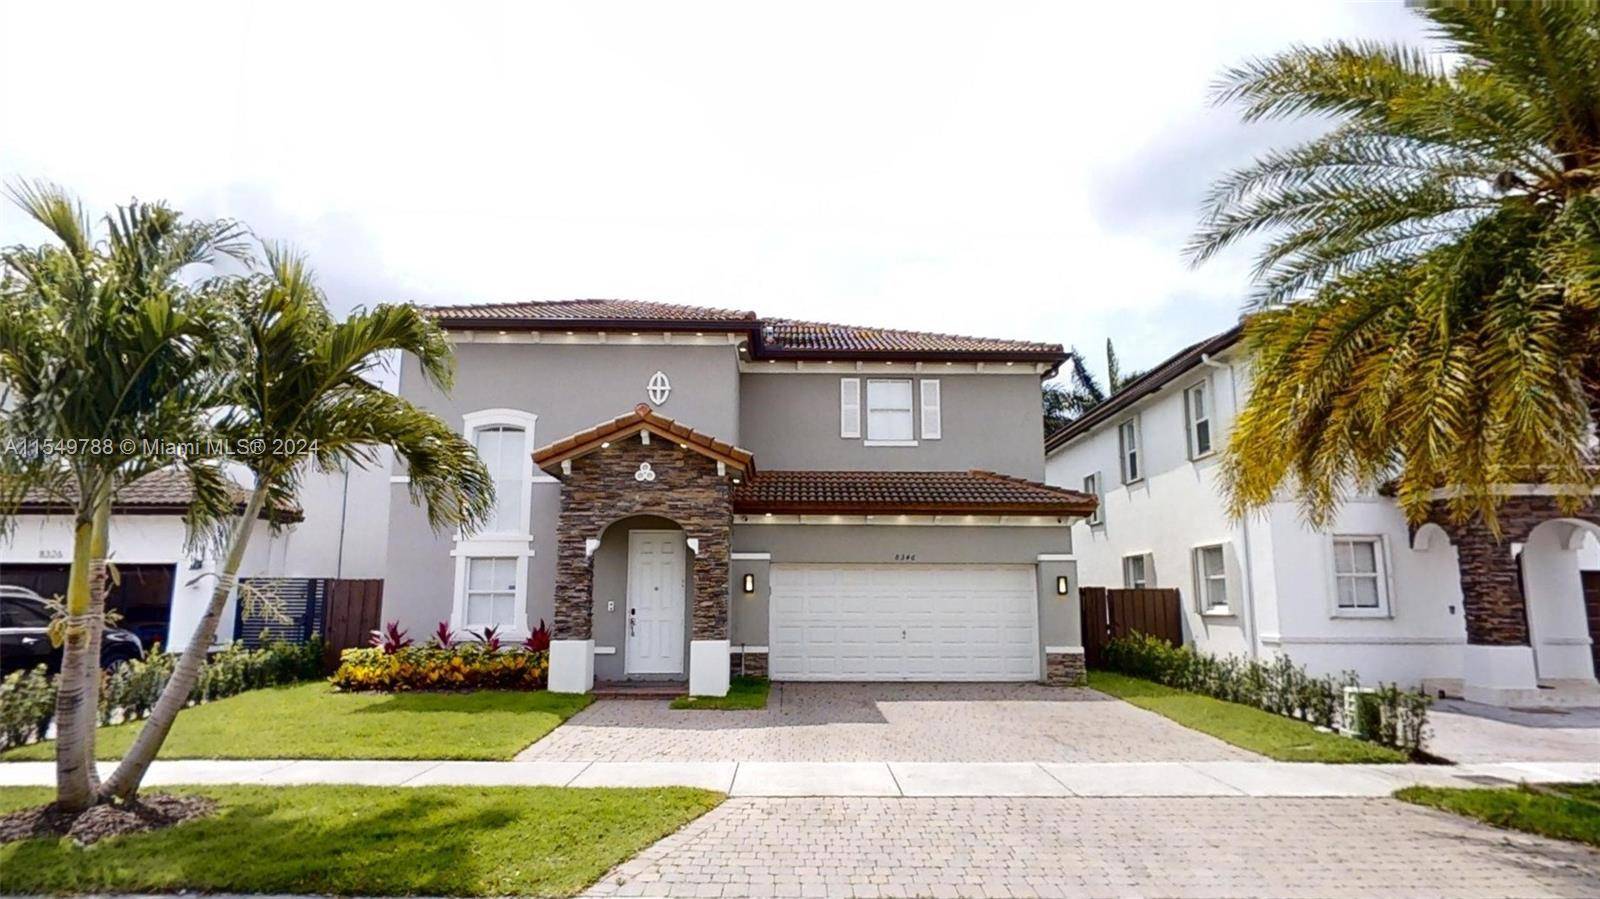 Stunning Two Story single family home in the most exclusive community, Menorca in Isle at Doral.